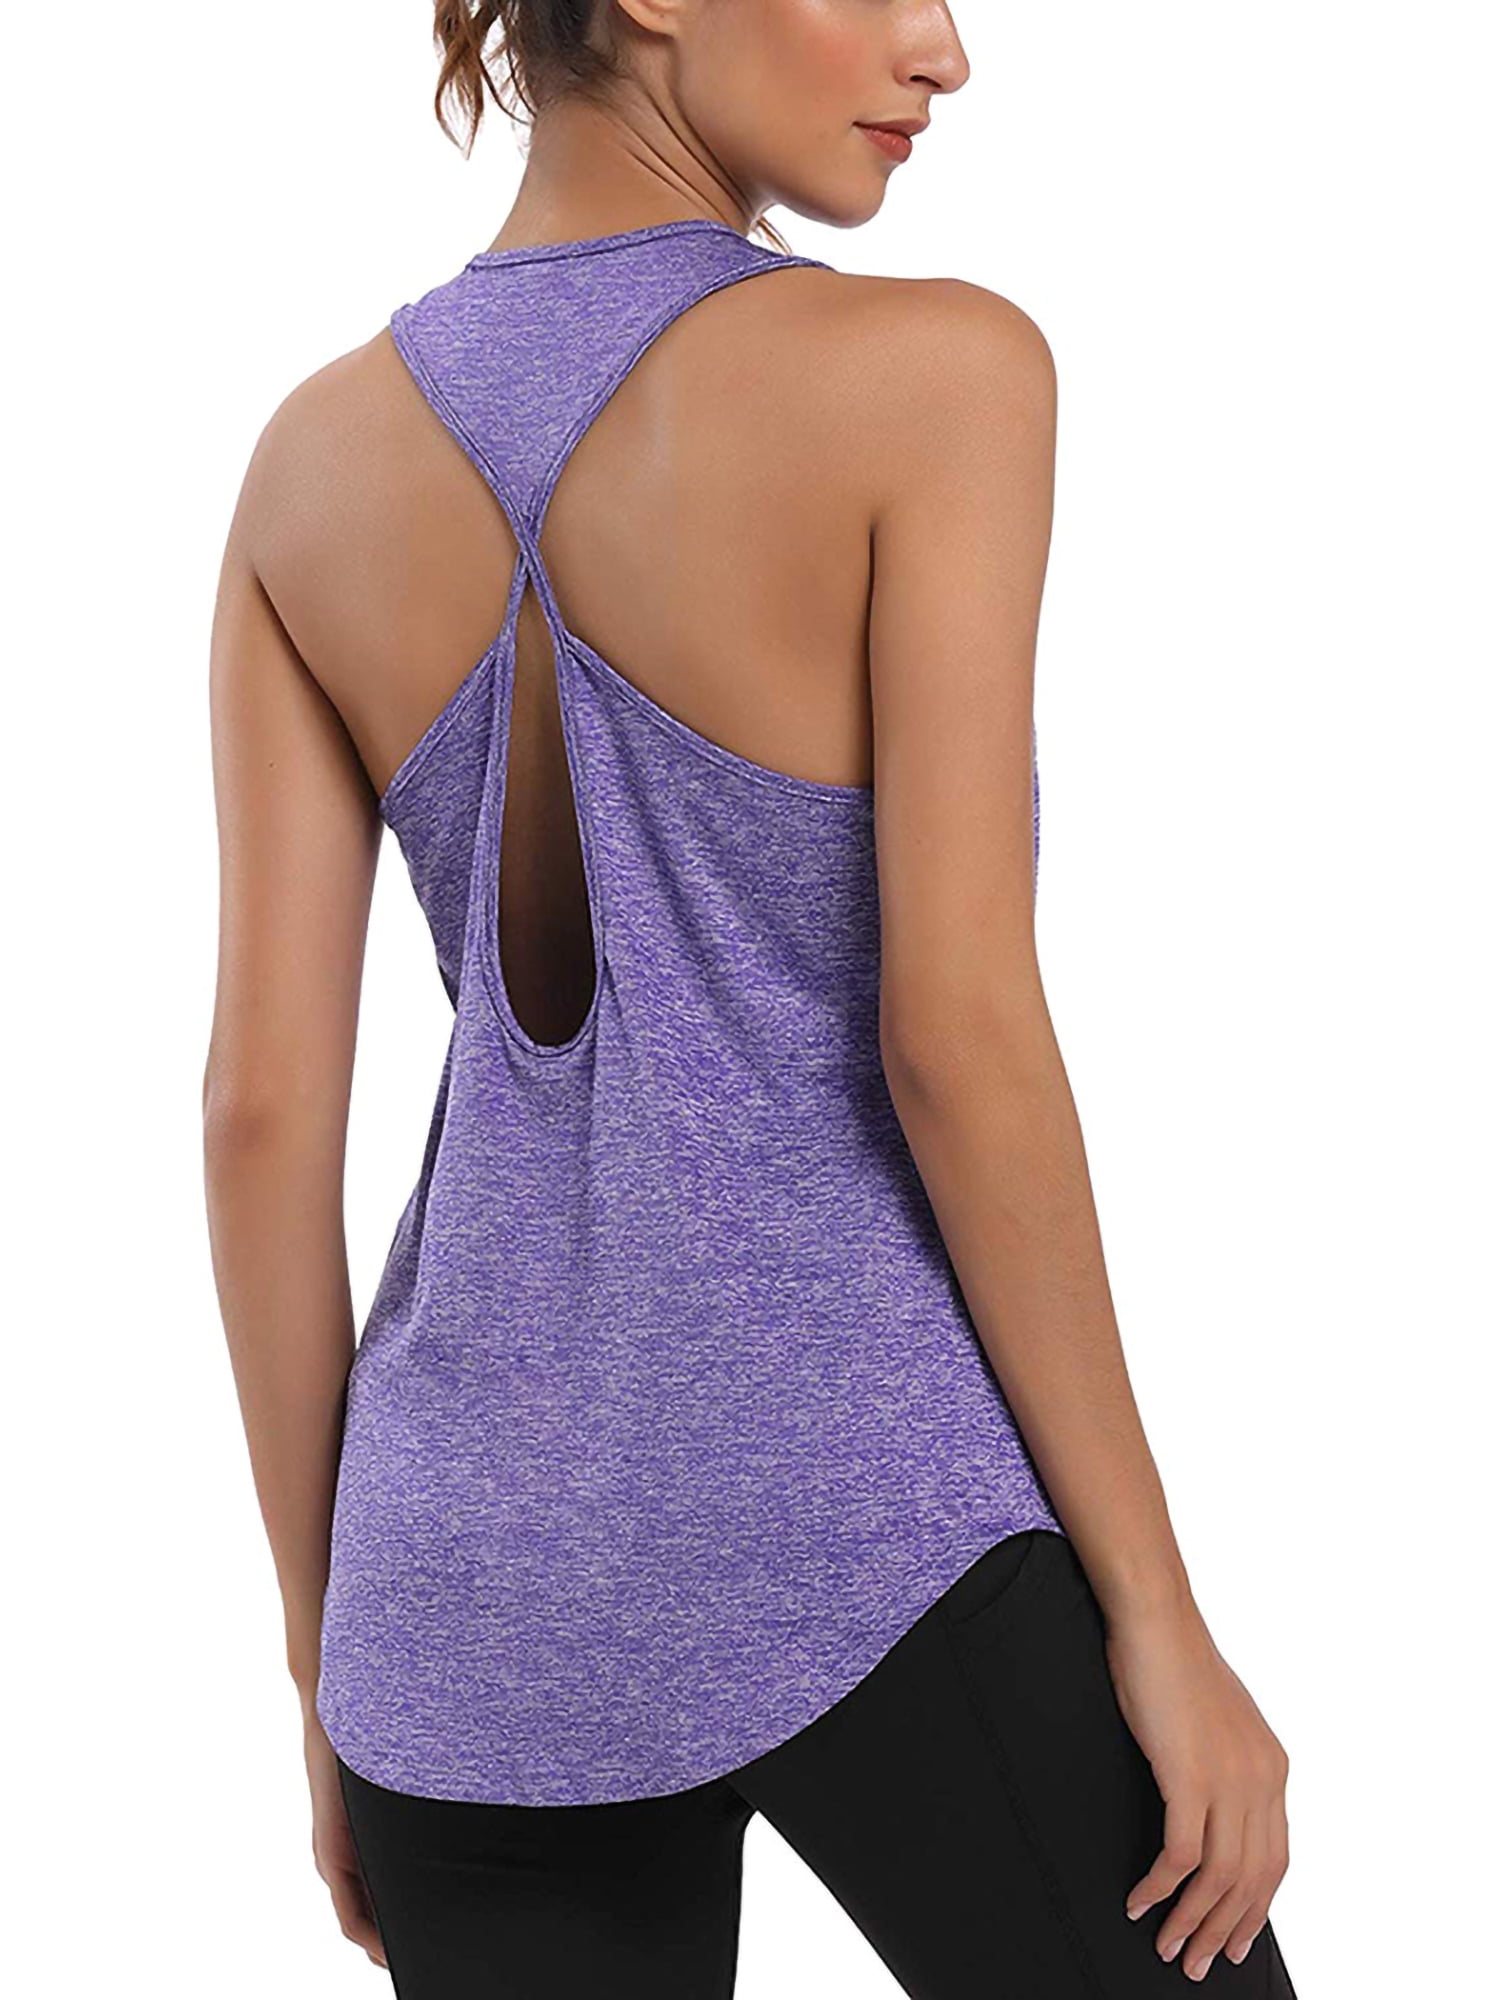 NEW Women Workout Tank Top T-shirt Sport Gym Clothes Fitness Yoga Backless Vests